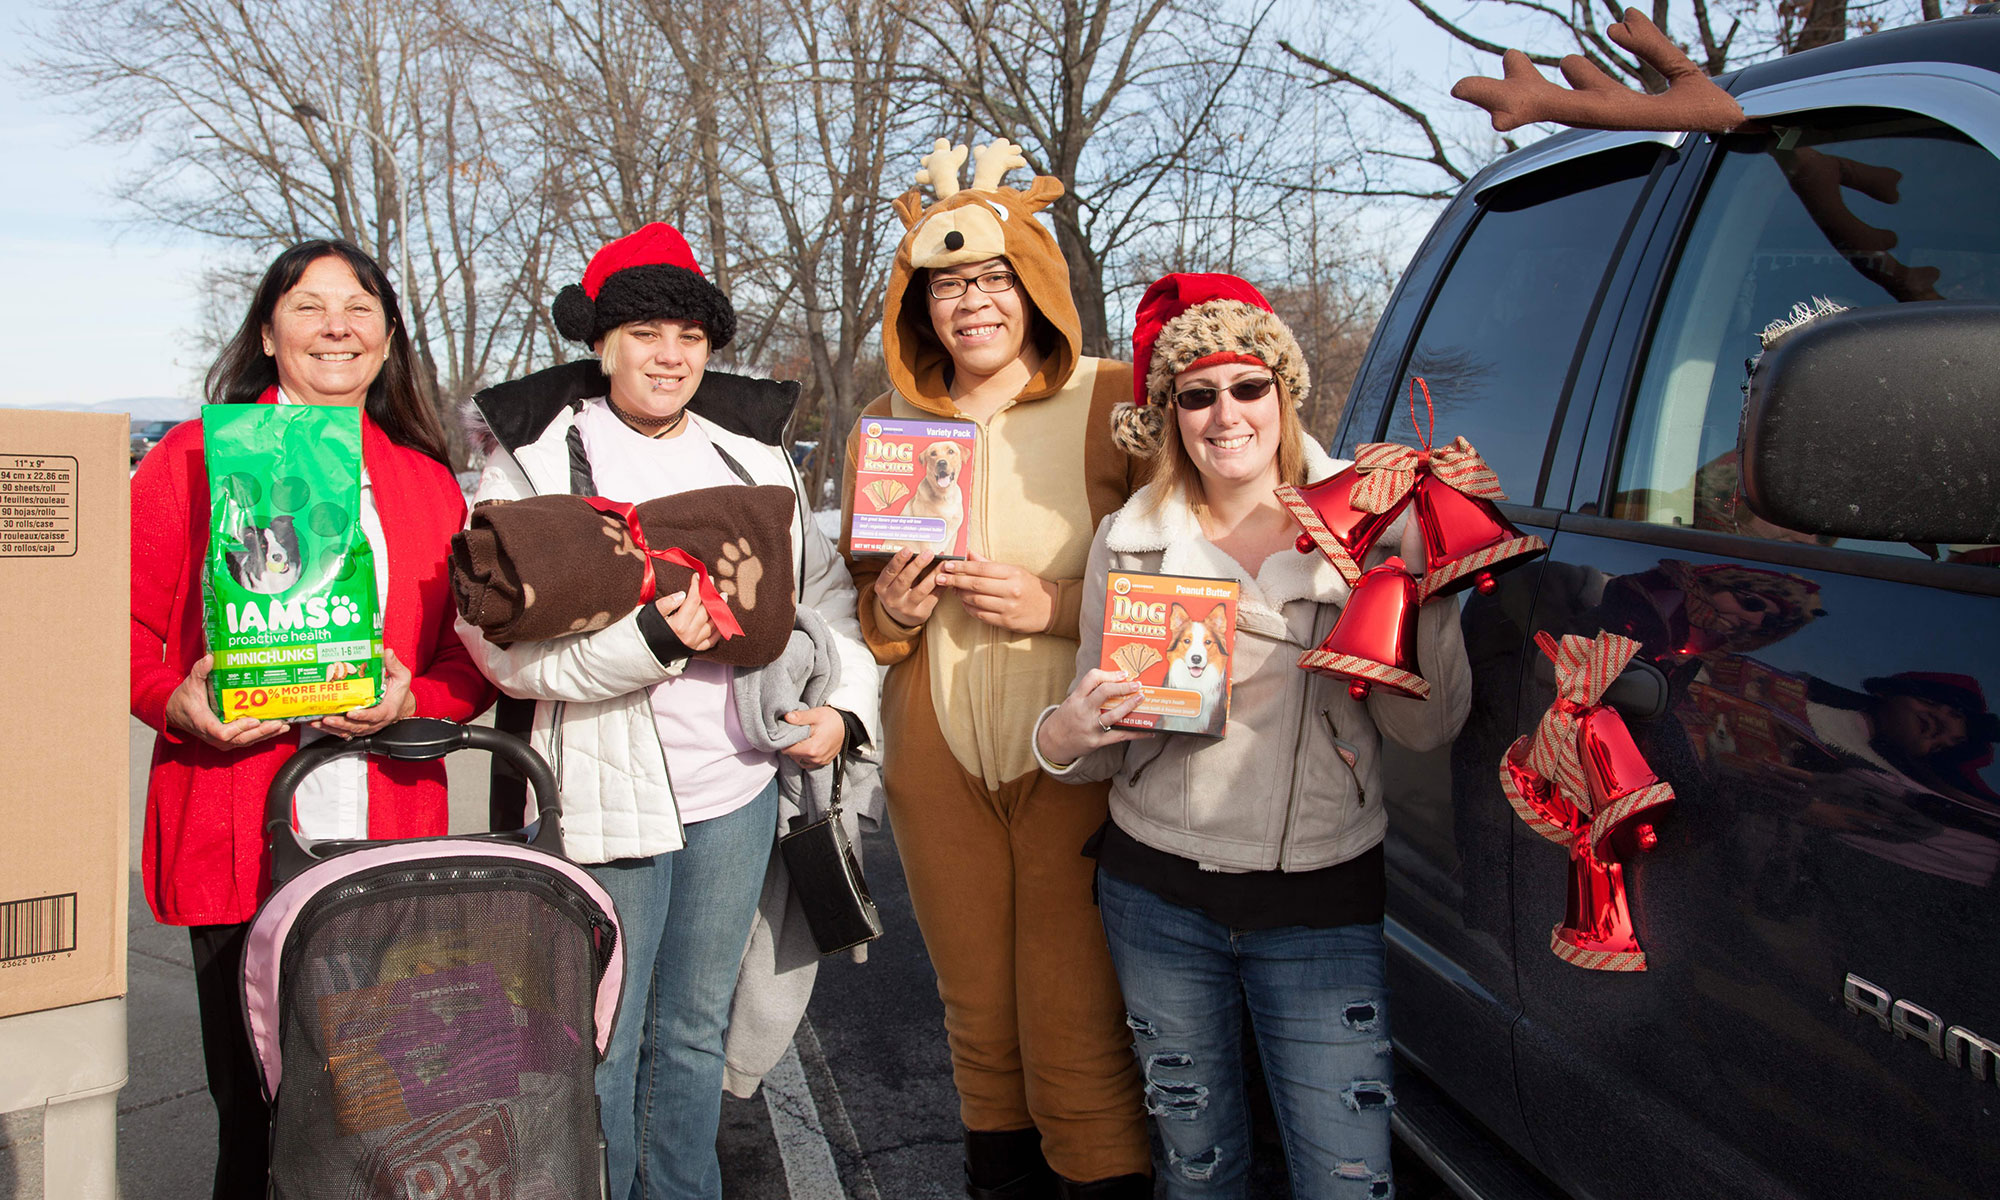 Ulster County Community College Vet Tech Club members outside with donations for the ASPCA.